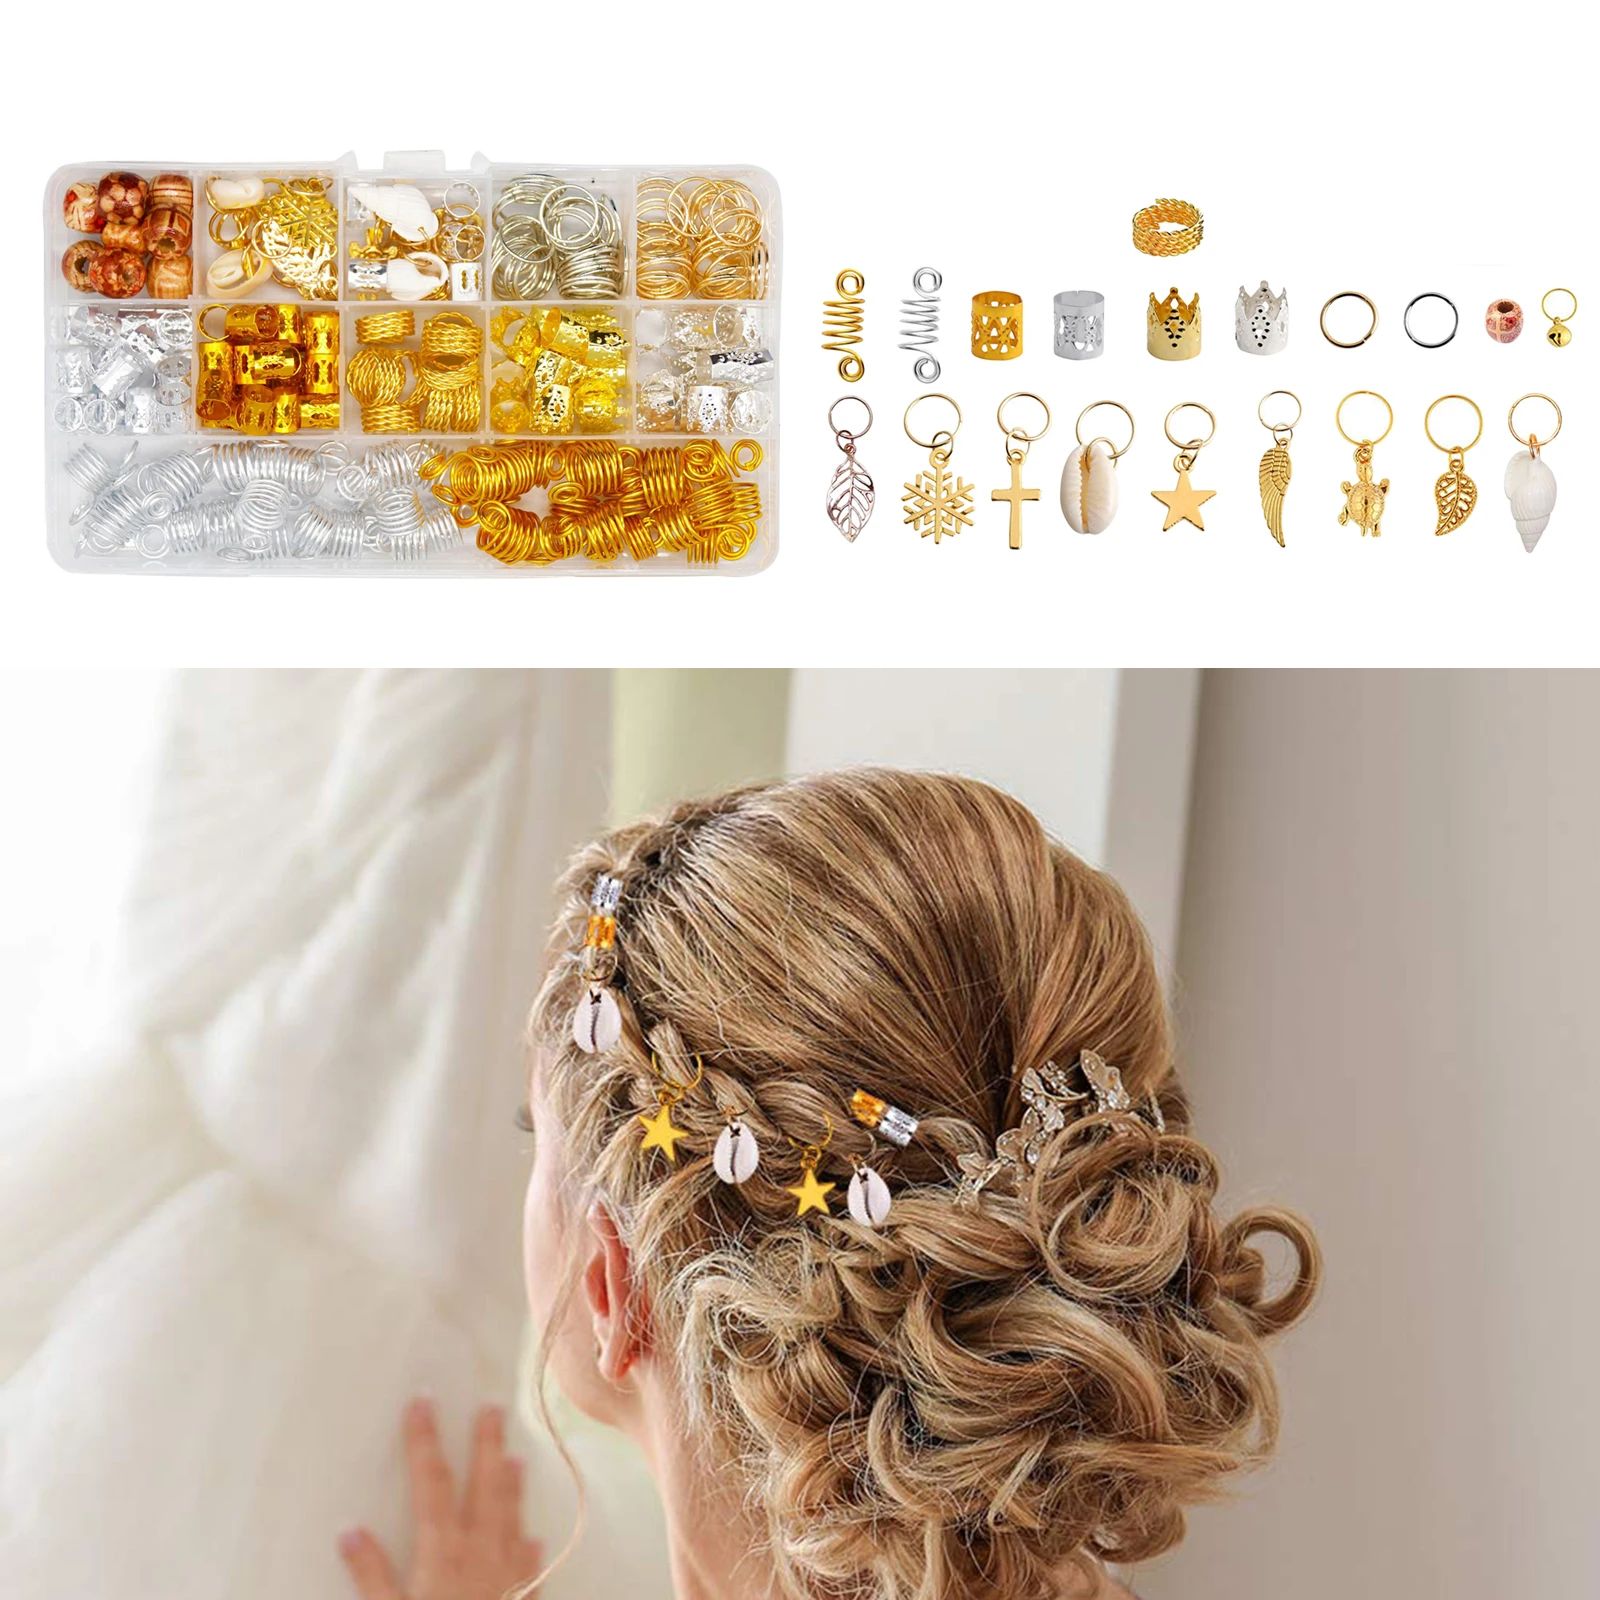 238Pcs Hair Coil Reusable Hair Braid Rings Clips Shell Leaves Conch Pendant Charms Cuffs Jewelry Headband Dreadlock Bridal Party